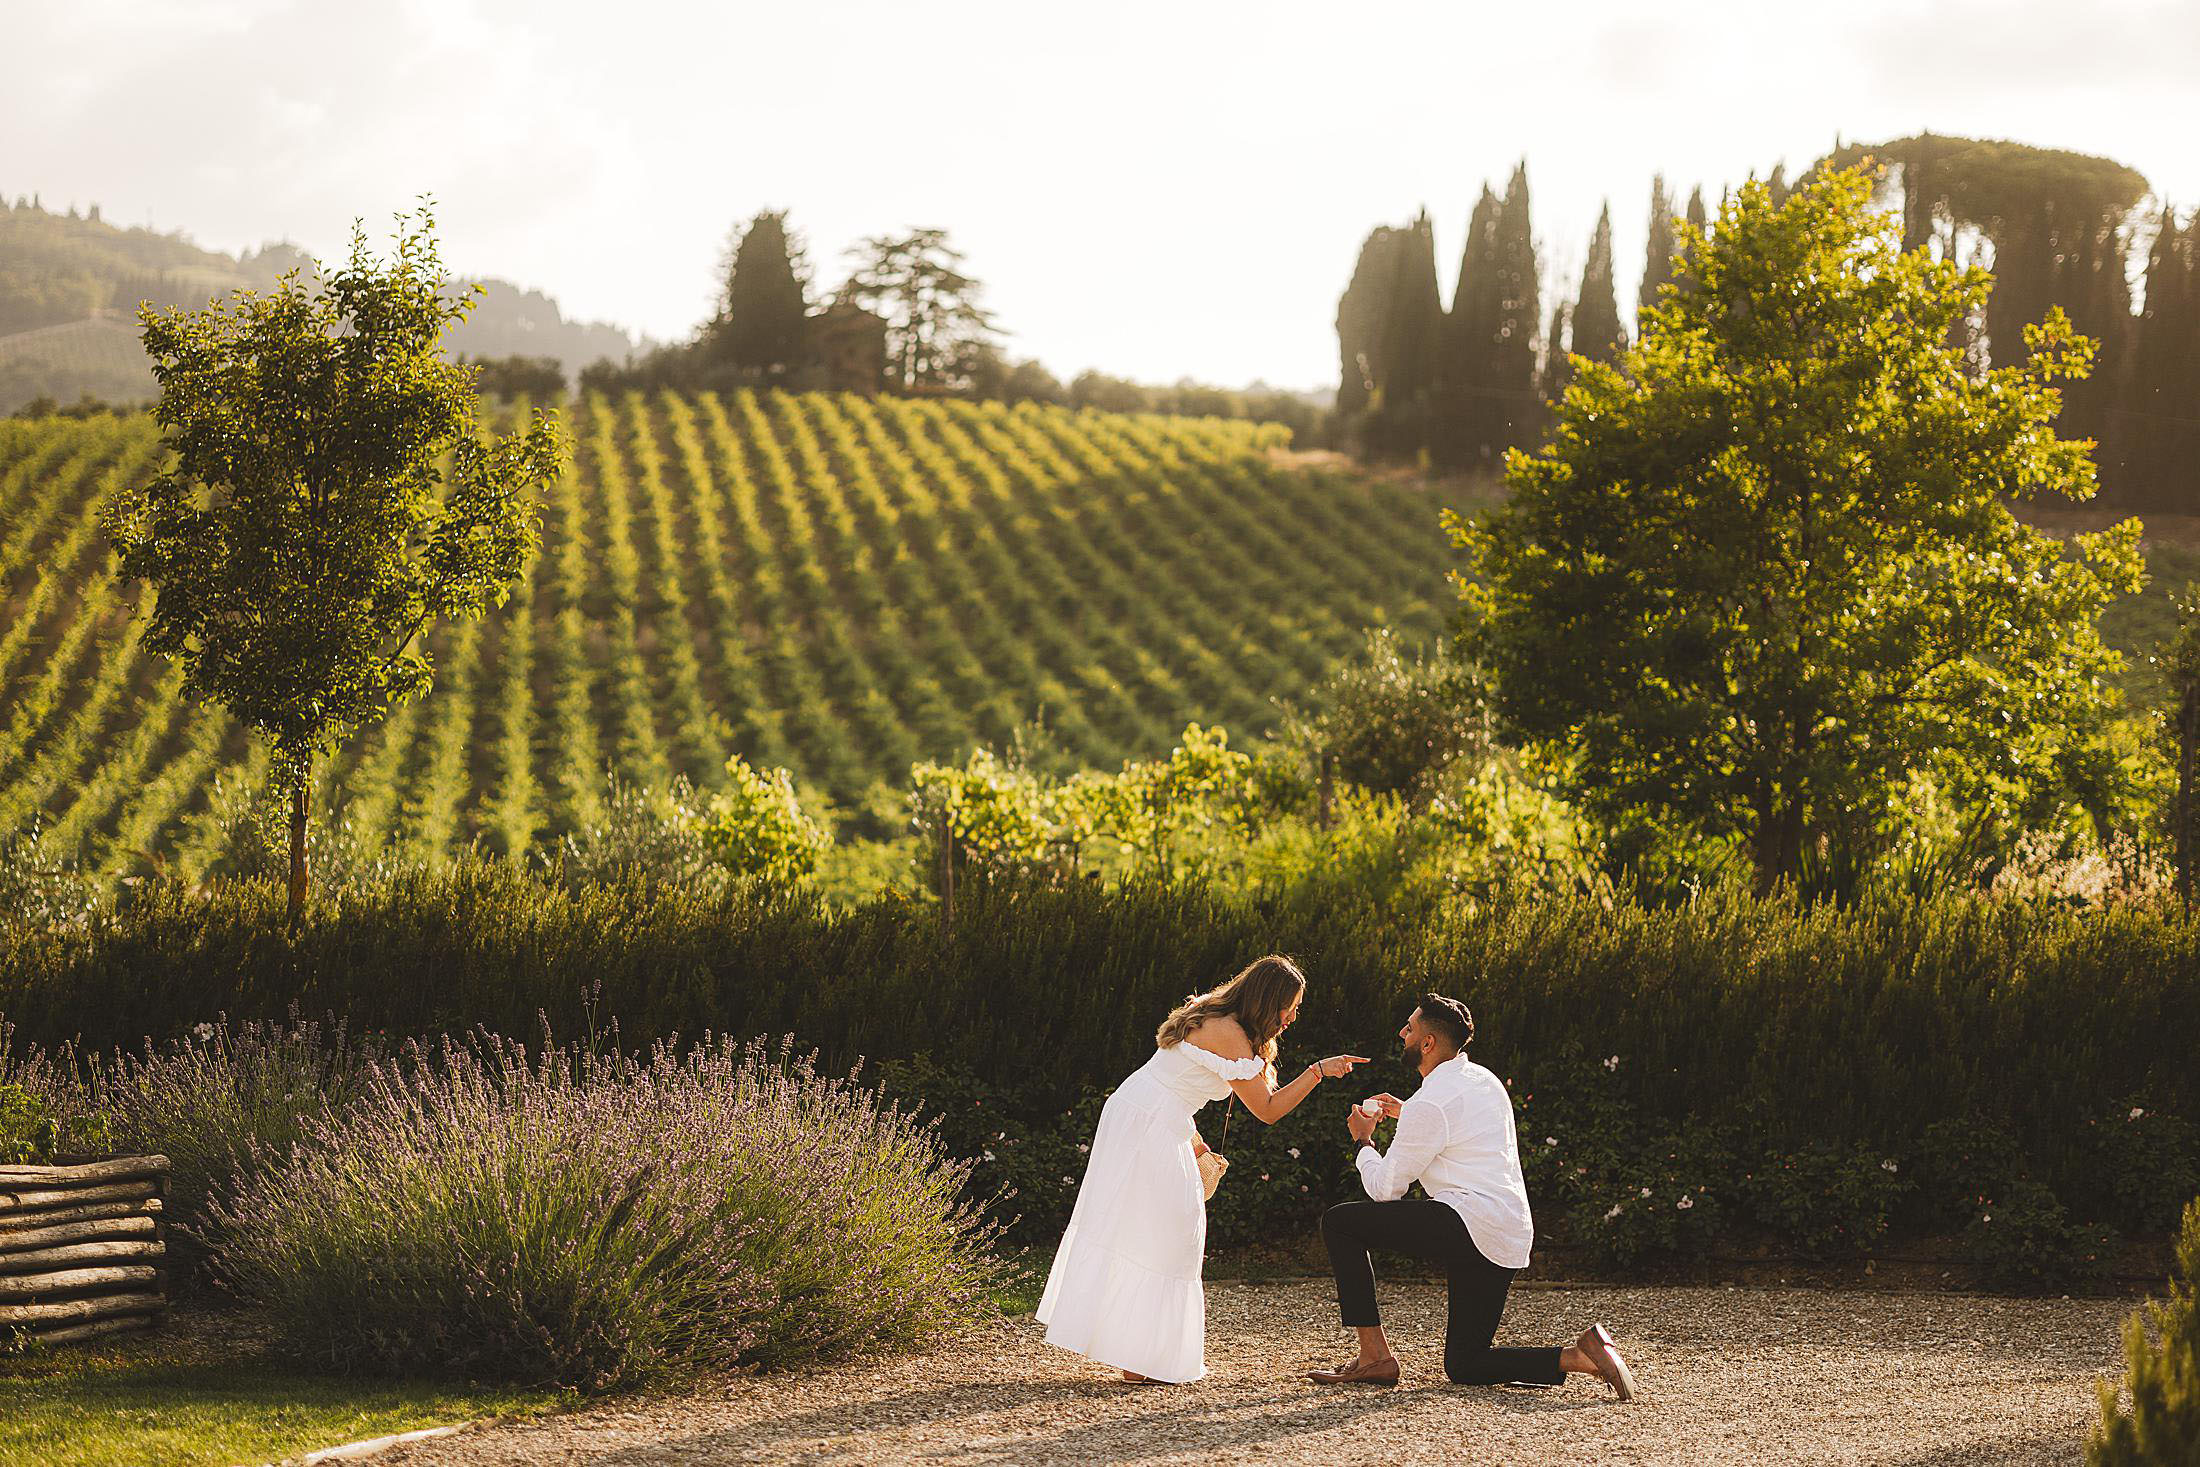 Making a vacation in Tuscany even more extraordinary through a secret wedding proposal